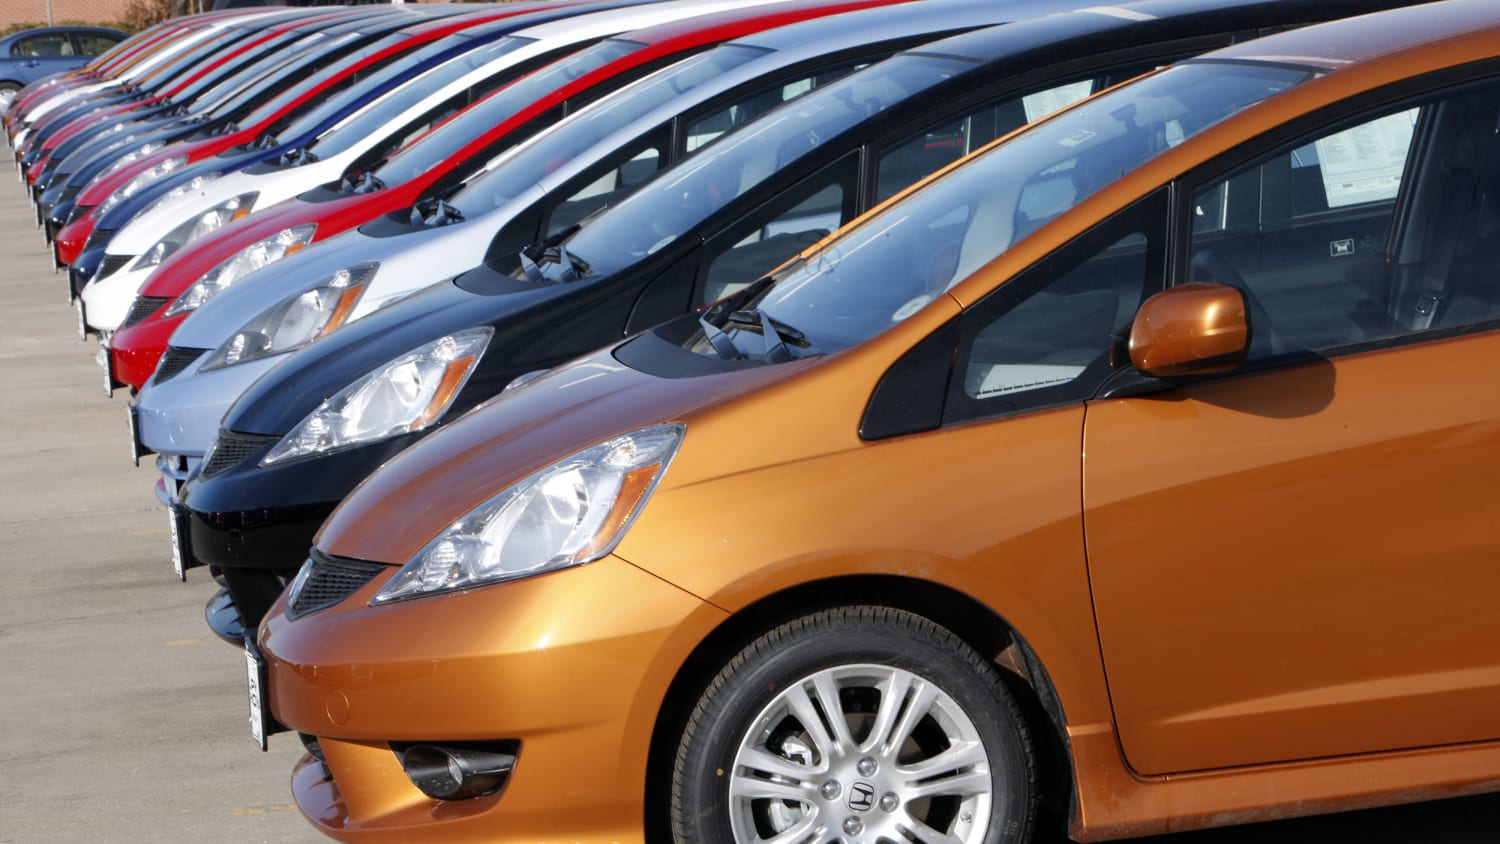 Car colors with the best resale value? It's not black or white